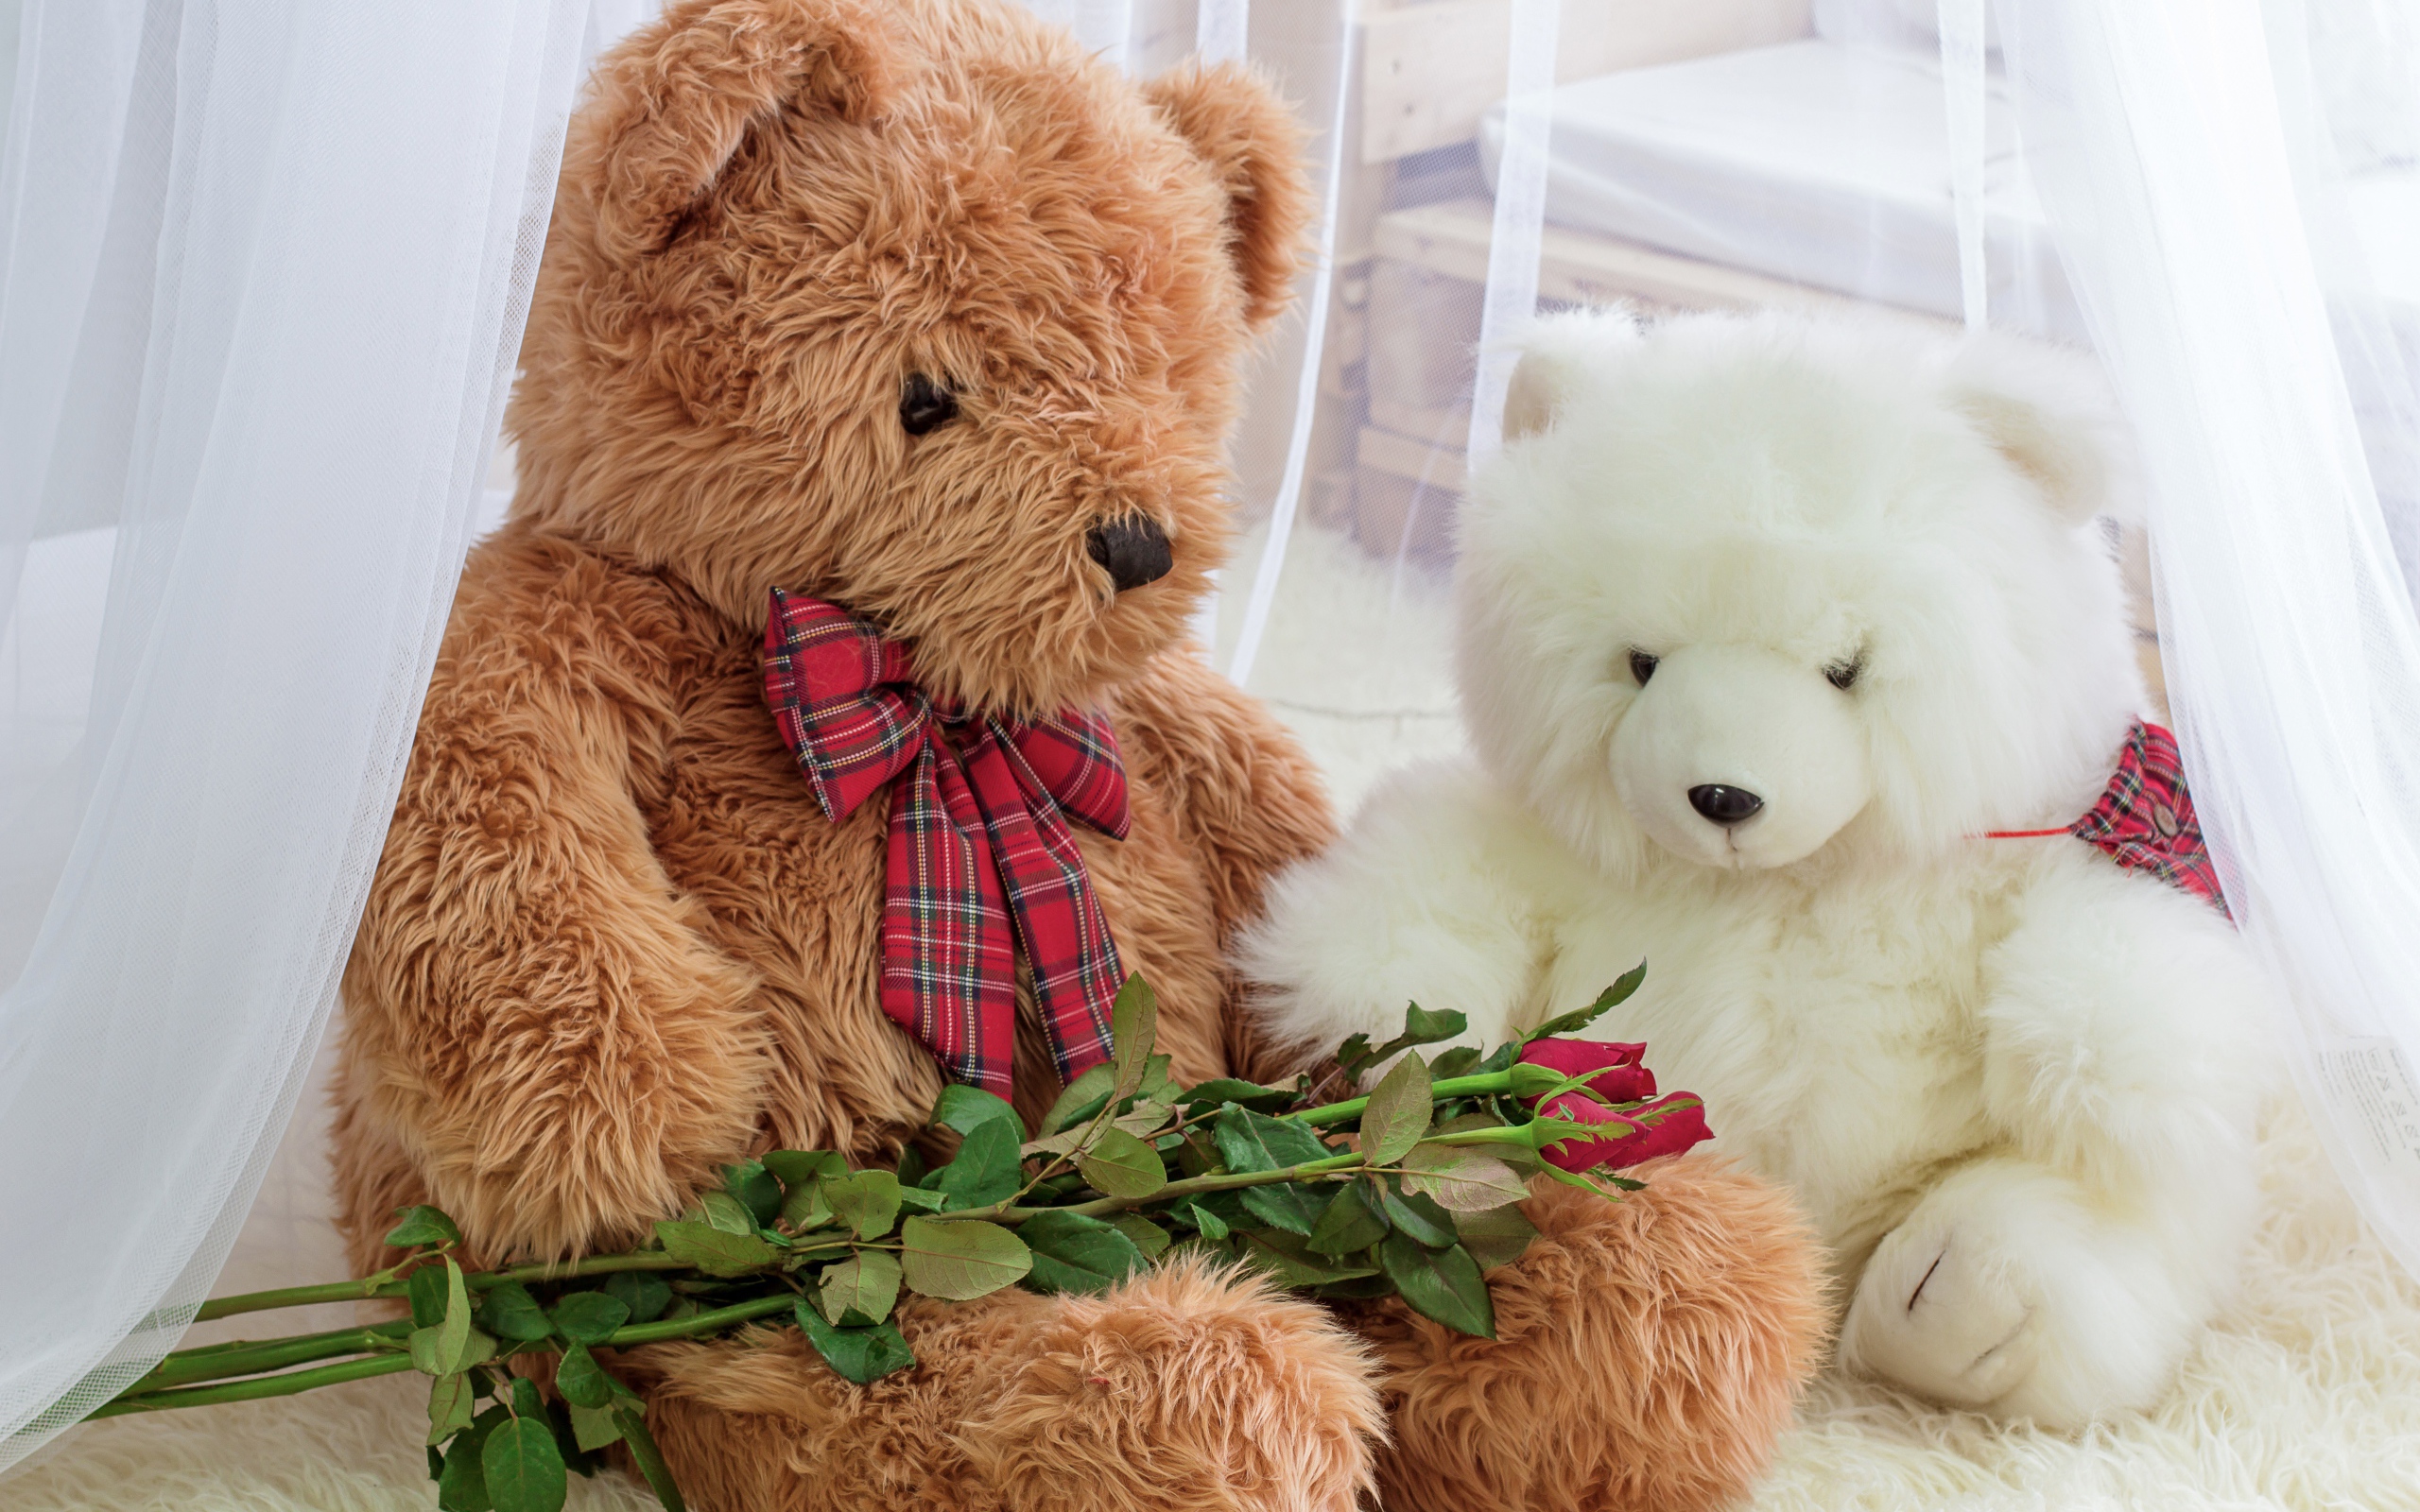 Two big toy bears with a bouquet of roses